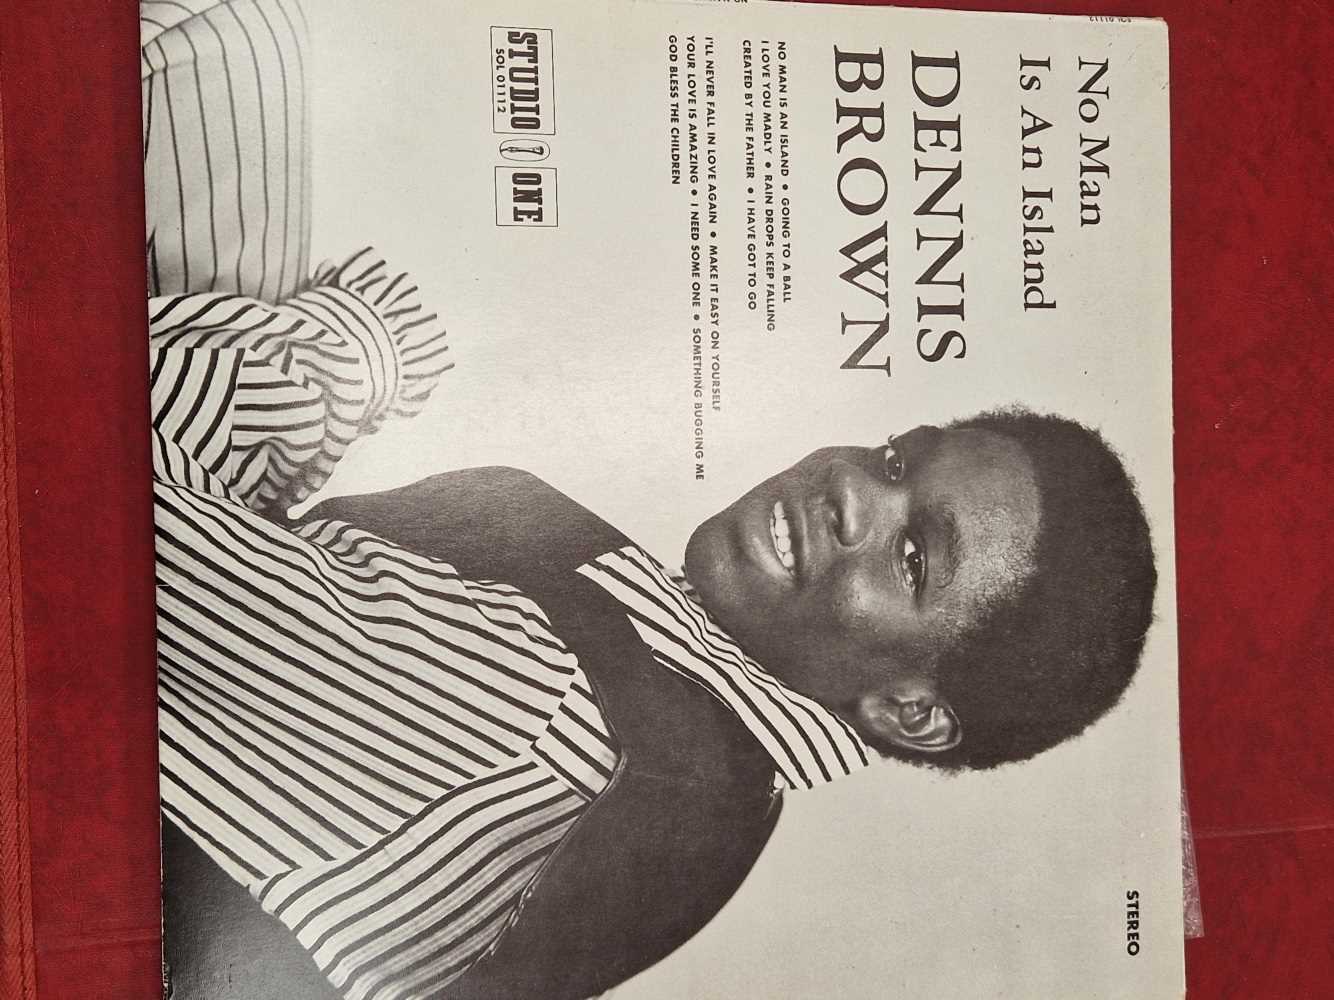 Two LP records, Reggae- Dennis Brown, No man is an island-SOL 01112 and Llodie And The Lowbites,